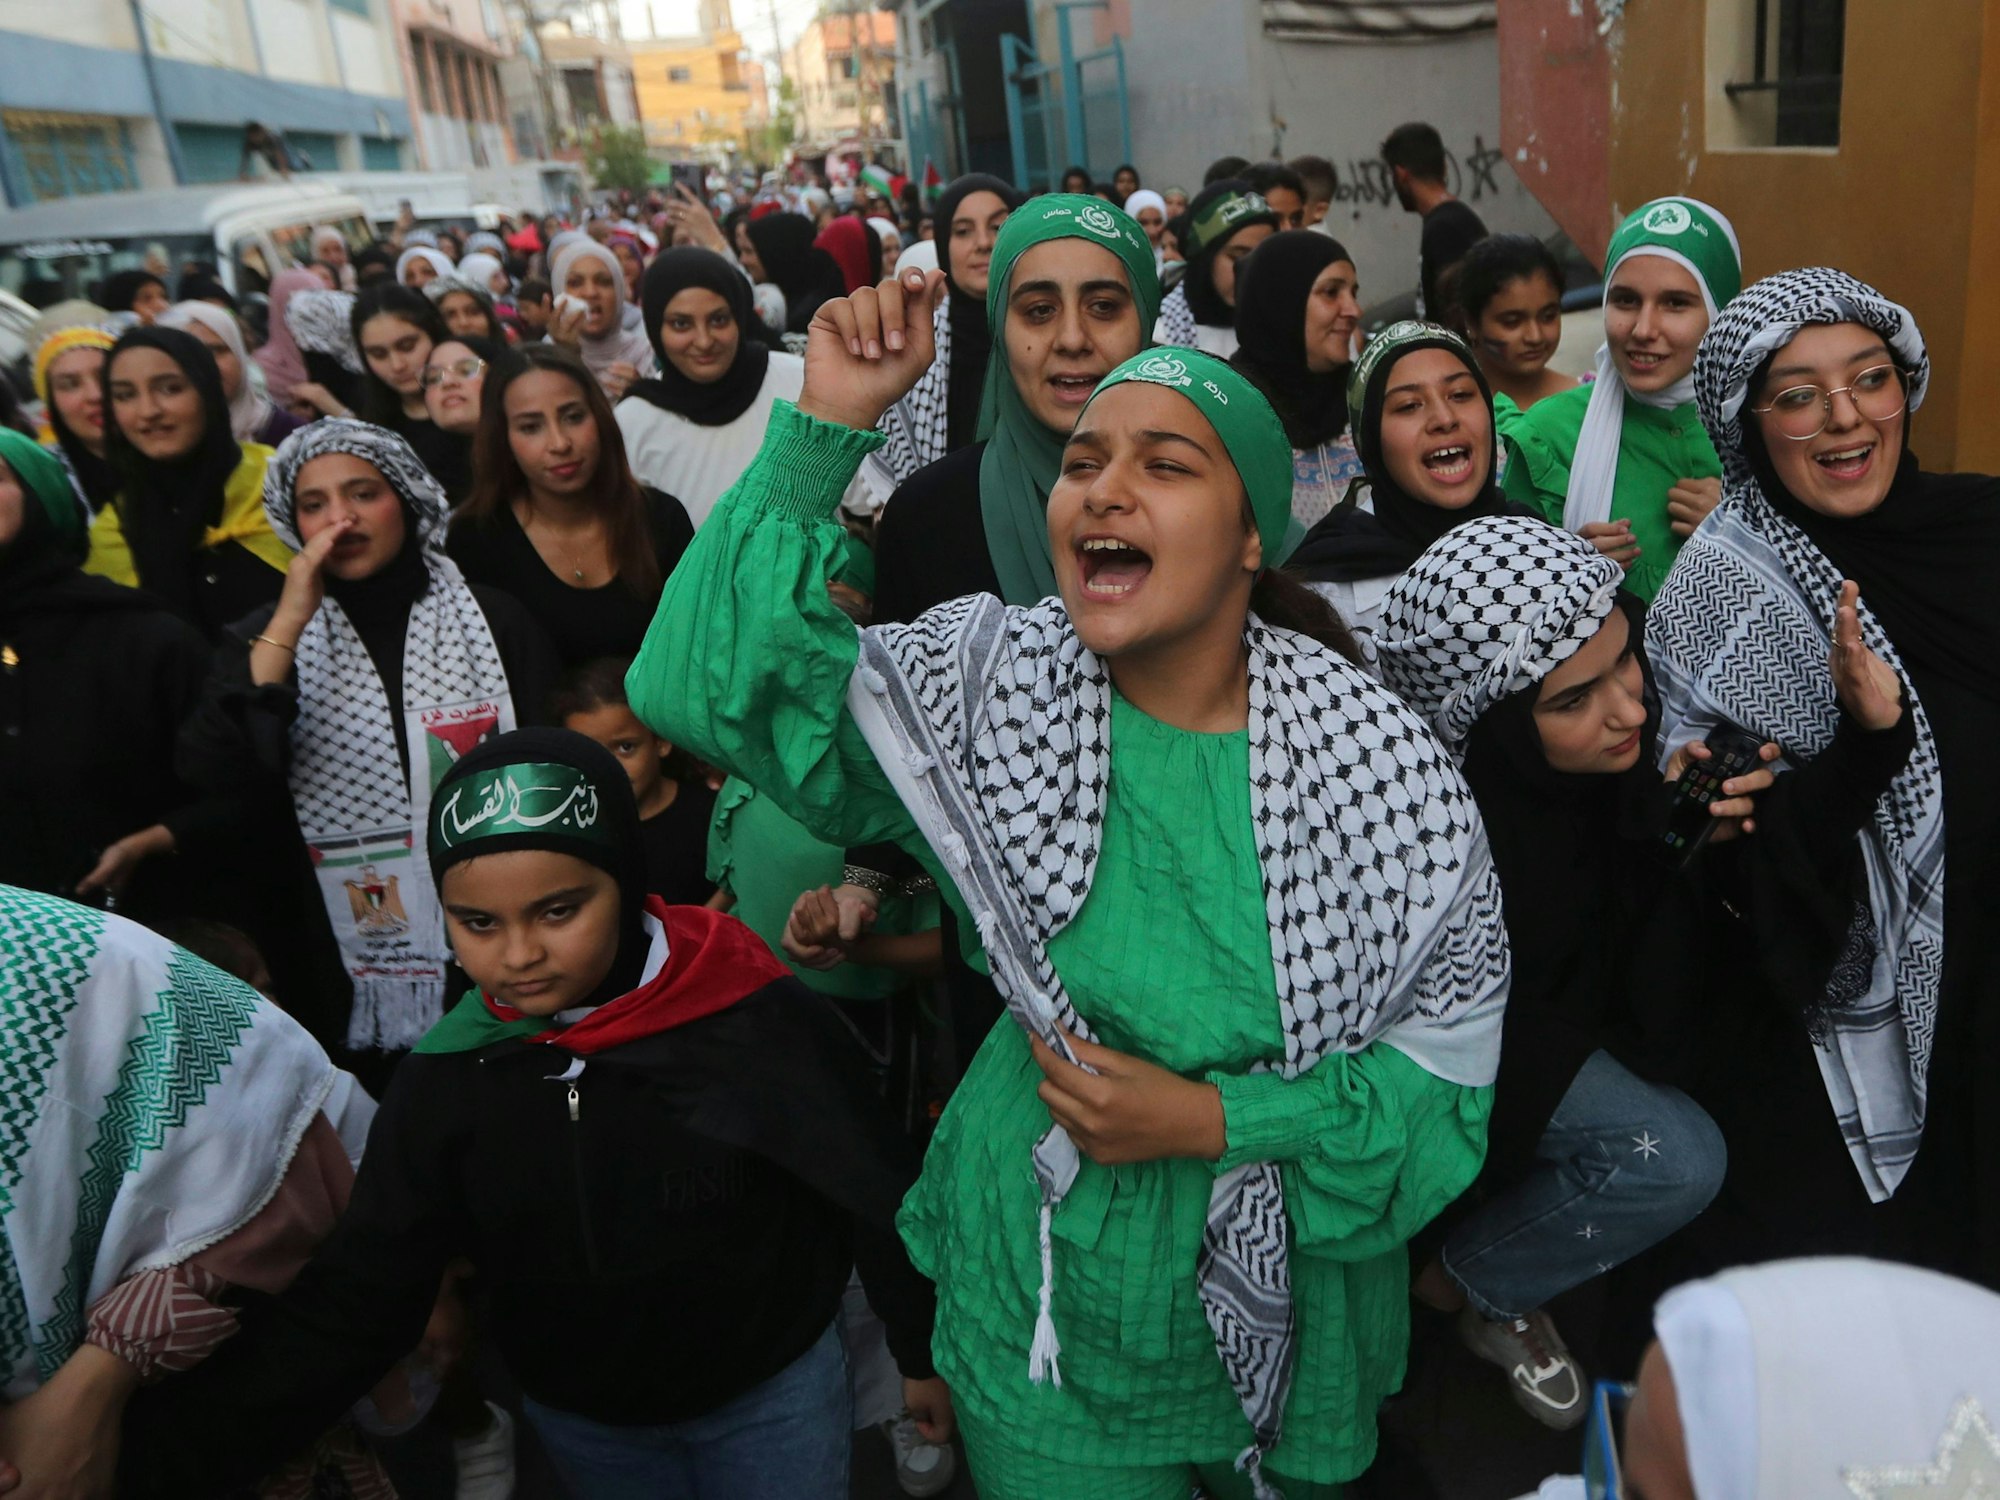 Palestinian shout slogans during a celebration of the attacks that the militant Hamas group carried out against Israel, at al-Bass Palestinian refugee camp, in southern port city of Tyre, Lebanon, Saturday, Oct. 7, 2023. The militant Hamas rulers of the Gaza Strip carried out an unprecedented, multi-front attack on Israel at daybreak Saturday, firing thousands of rockets as dozens of Hamas fighters infiltrated the heavily fortified border in several locations by air, land, and sea and catching the country off-guard on a major holiday. (AP Photo/Mohammed Zaatari)